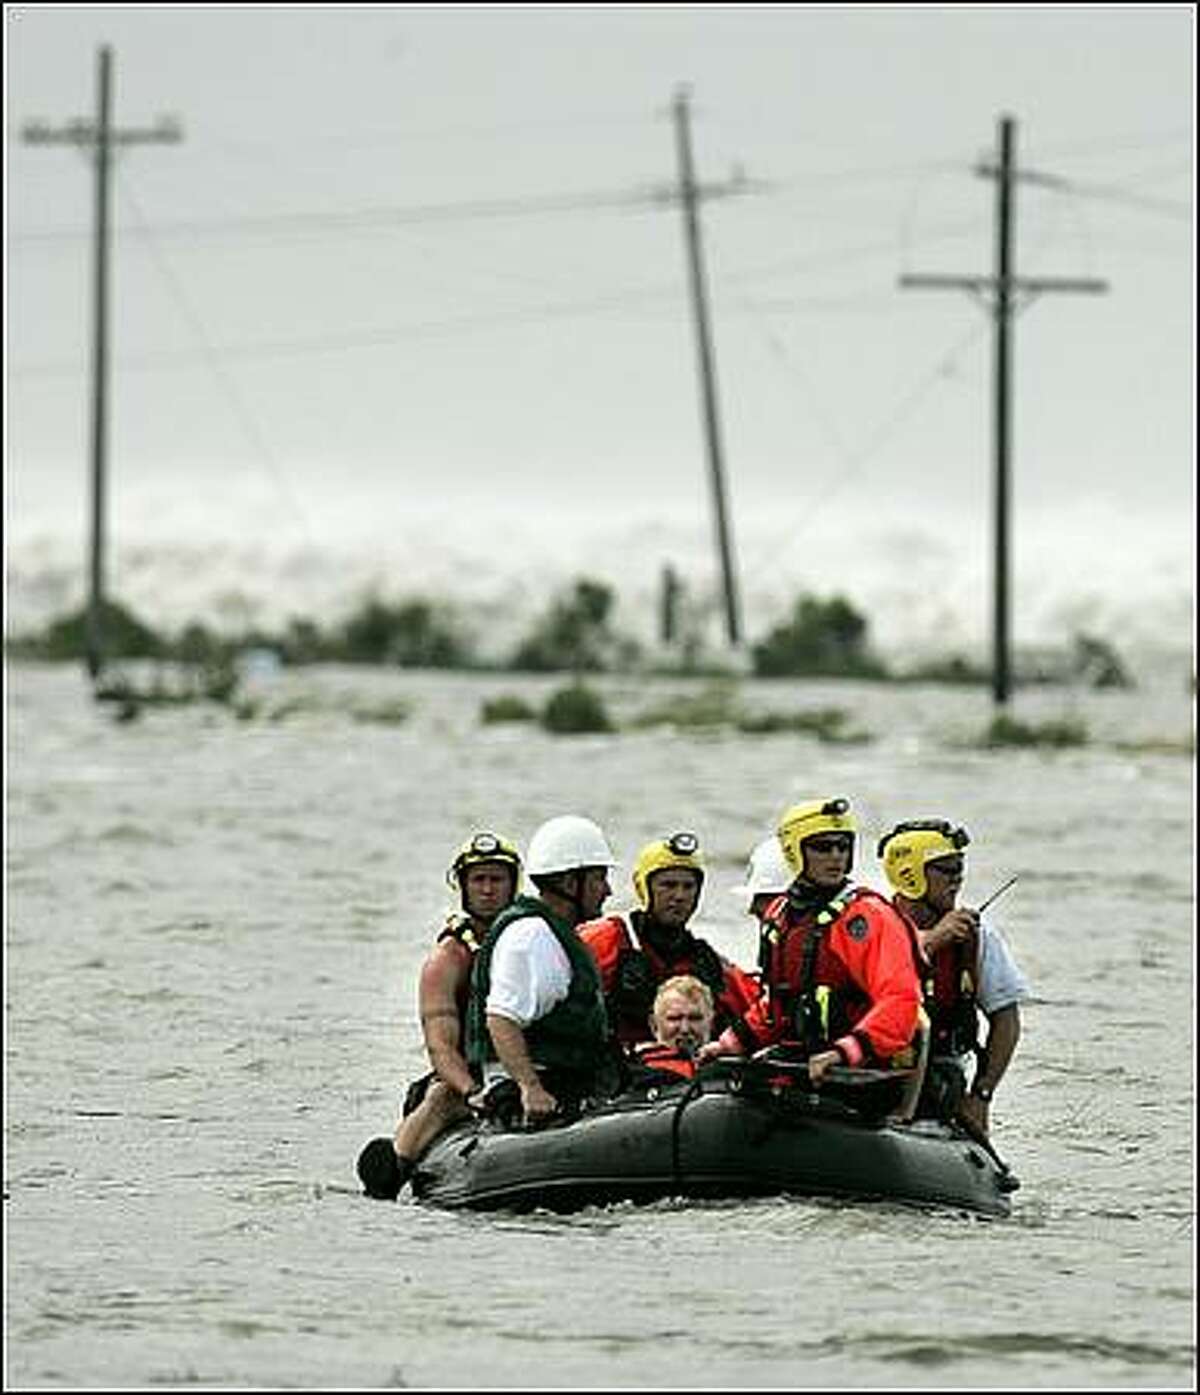 Bill Murphy, center, is taken to high ground by boat after his wife Barbara and two others were rescued by a Coast Guard helicopter in High Island, Texas as Hurricane Ike moves towards Texas. Murphy and his wife were leaving their home in Bolivar and stopped to pick up two stranded motorists when they became stranded too when rapidly rising water hit their truck(AP Photo/The Dallas Morning News, Guy Reynolds)